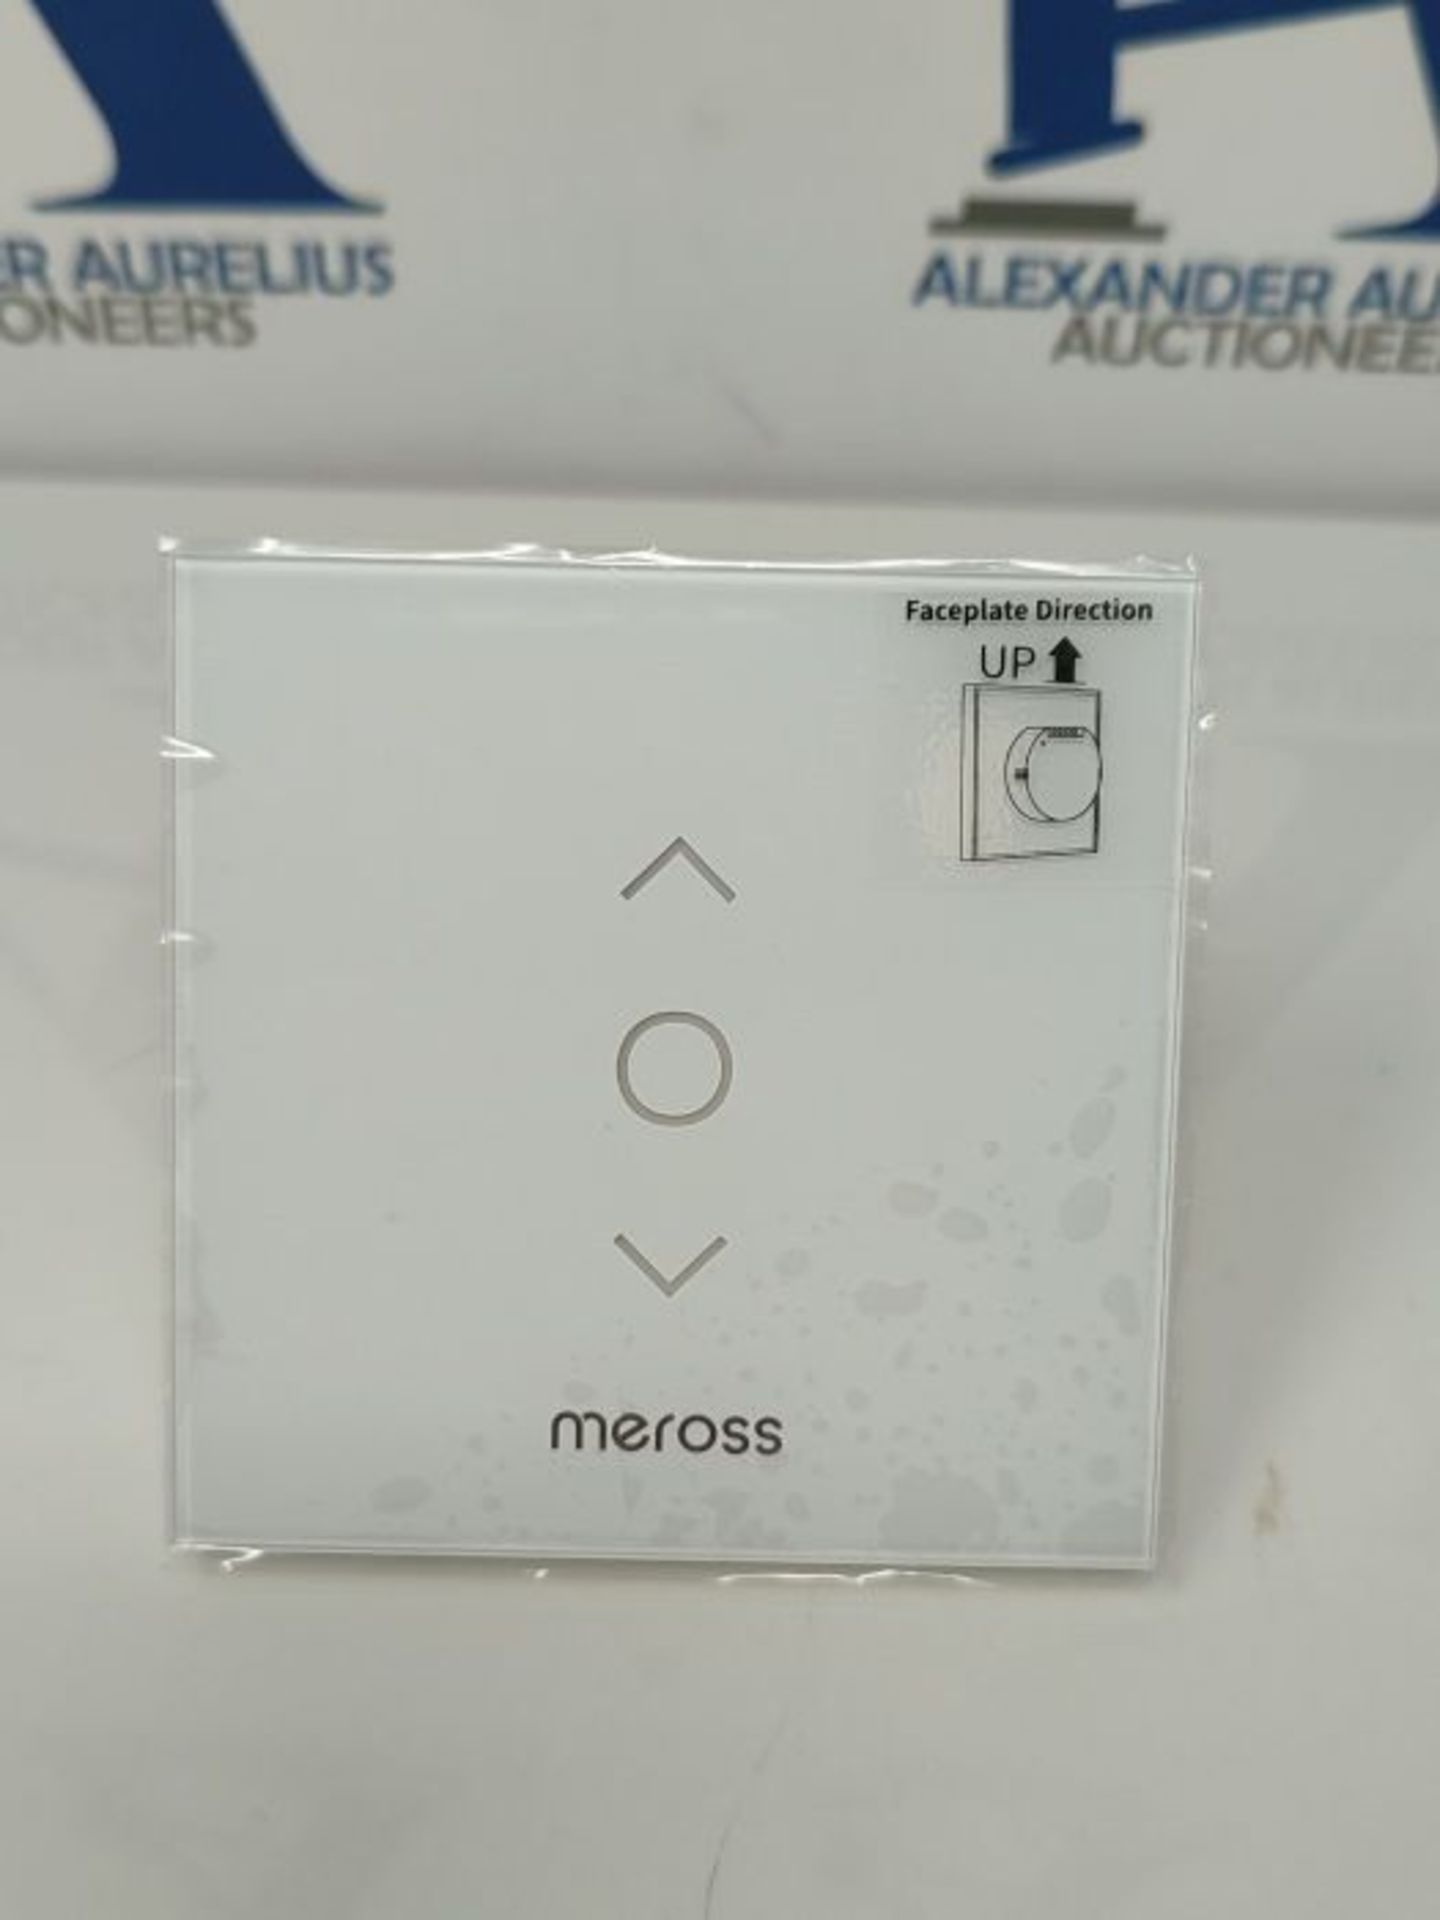 WiFi Roller Shutter Switch - Meross Smart Blind Switch Compatible with Alexa - Image 3 of 3